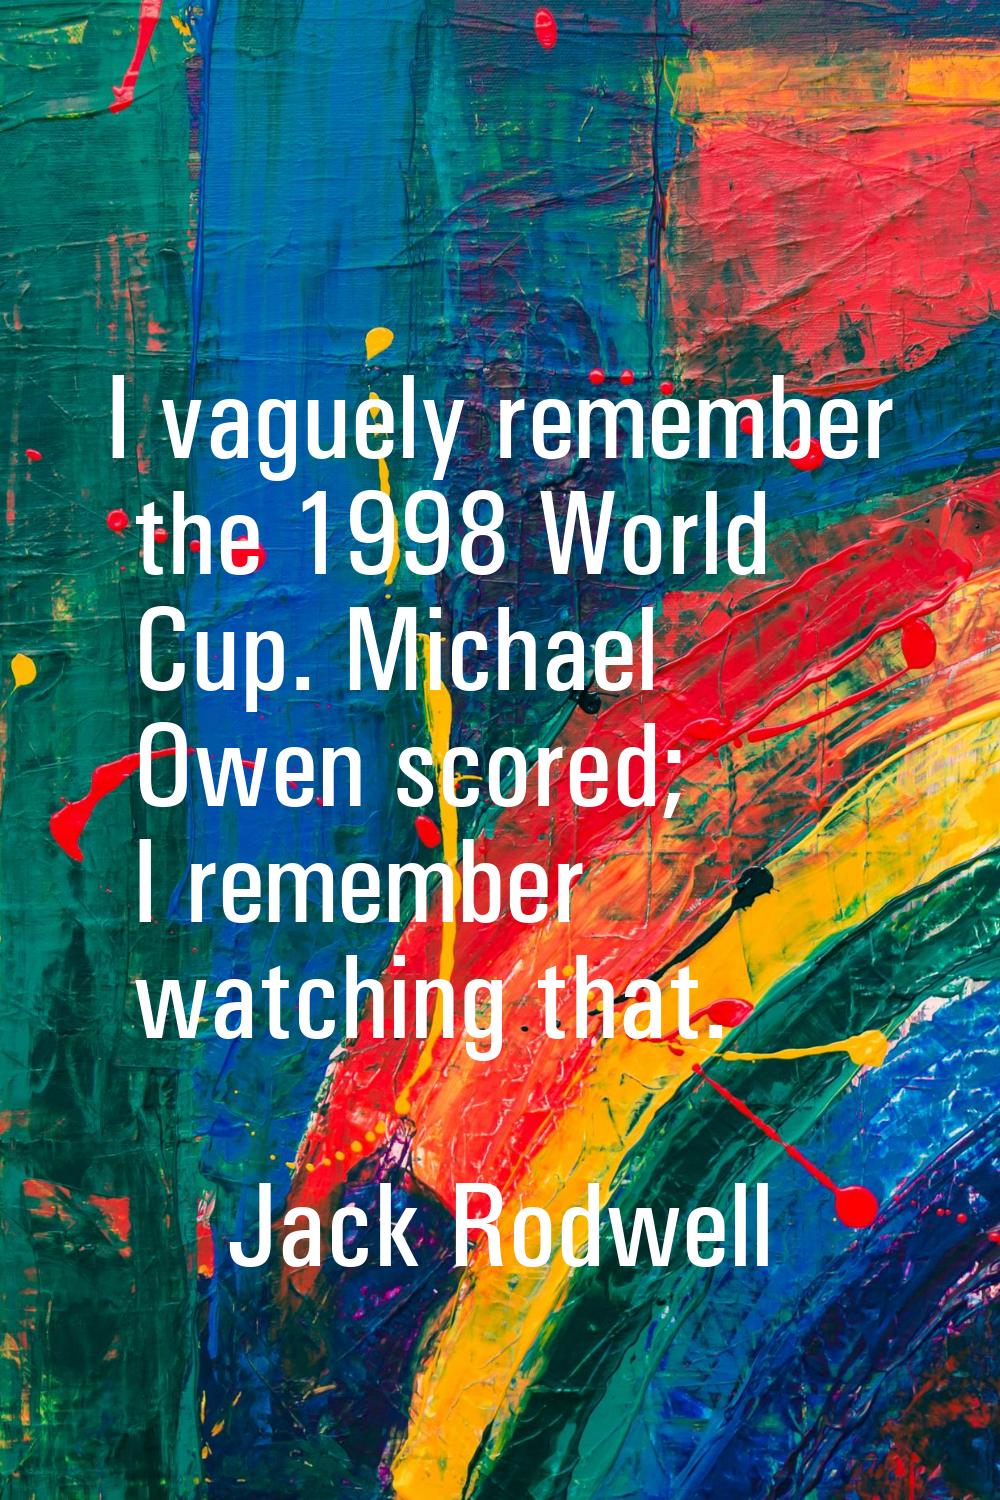 I vaguely remember the 1998 World Cup. Michael Owen scored; I remember watching that.